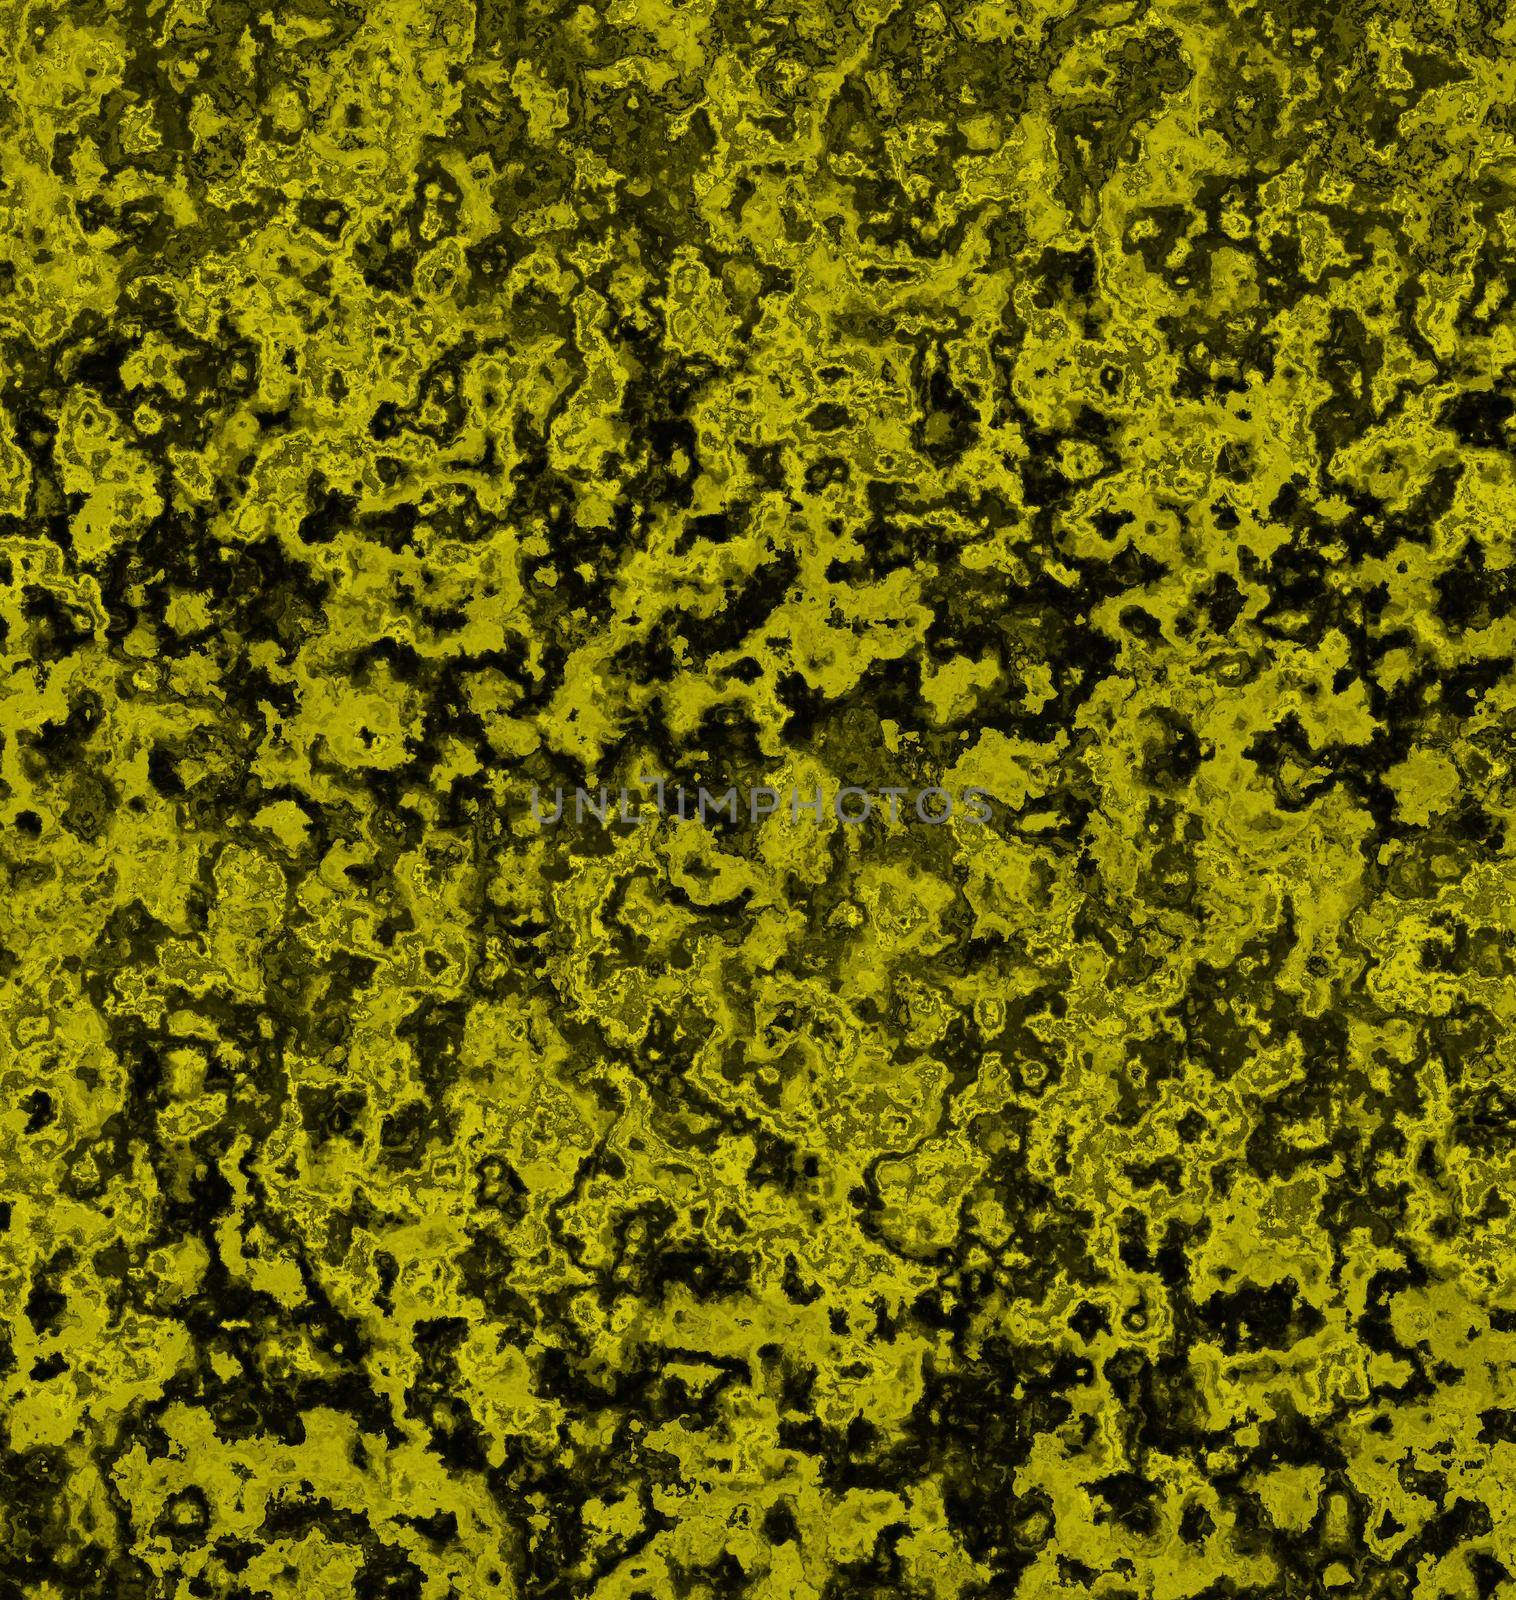 Wavy and haphazard mixing of yellow shades on black canvas. Concept of home decor and interior designing